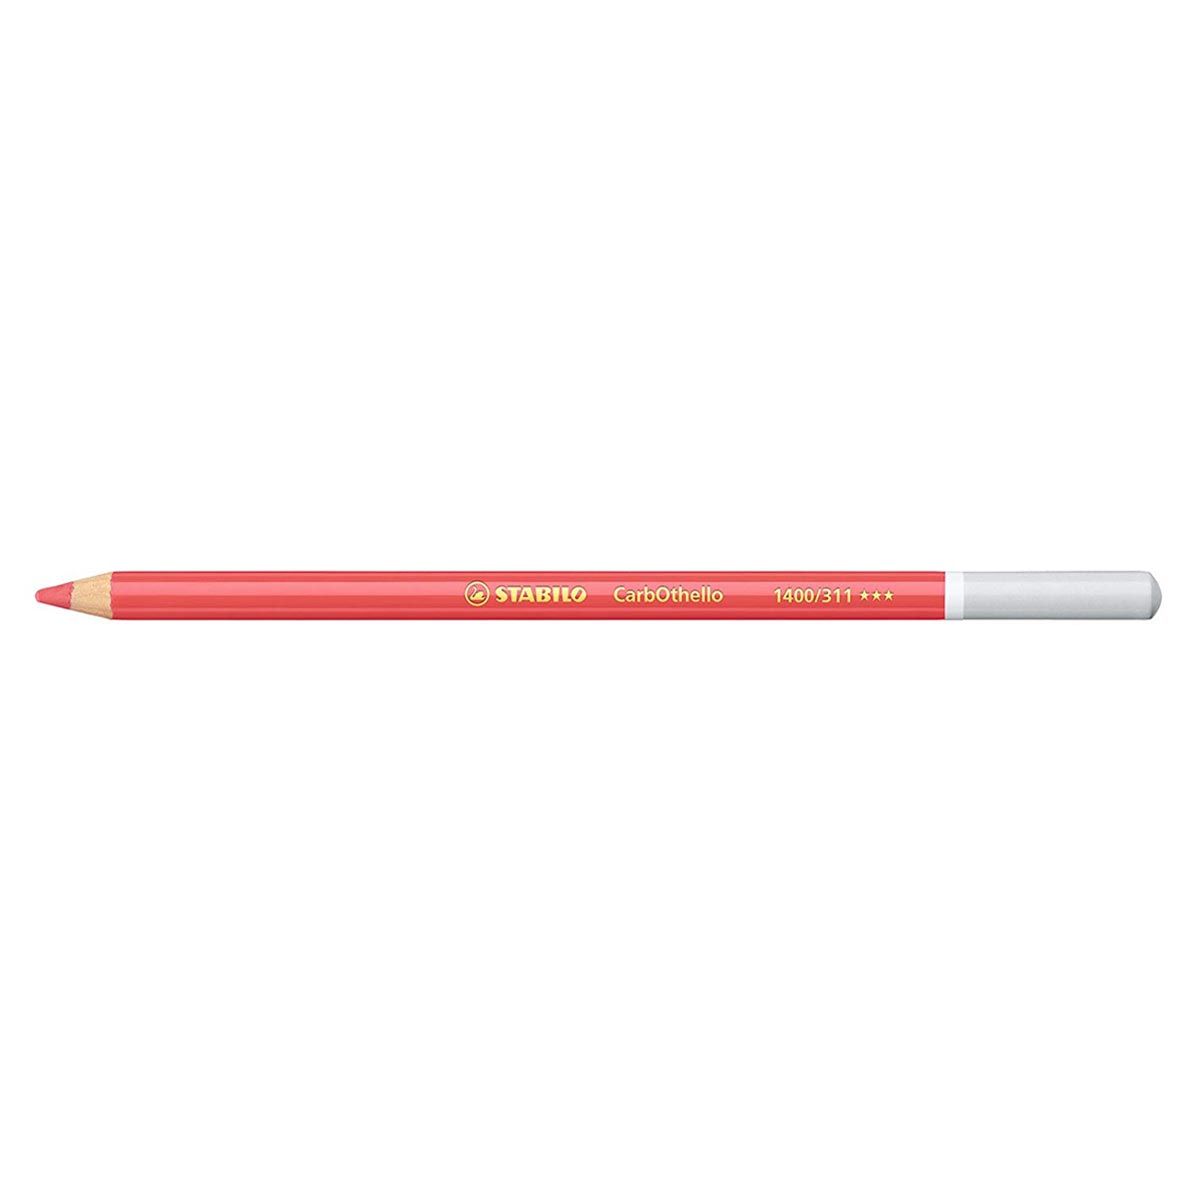 Stabilo Carbothello Pastel Pencil Carmine Red Middle 311